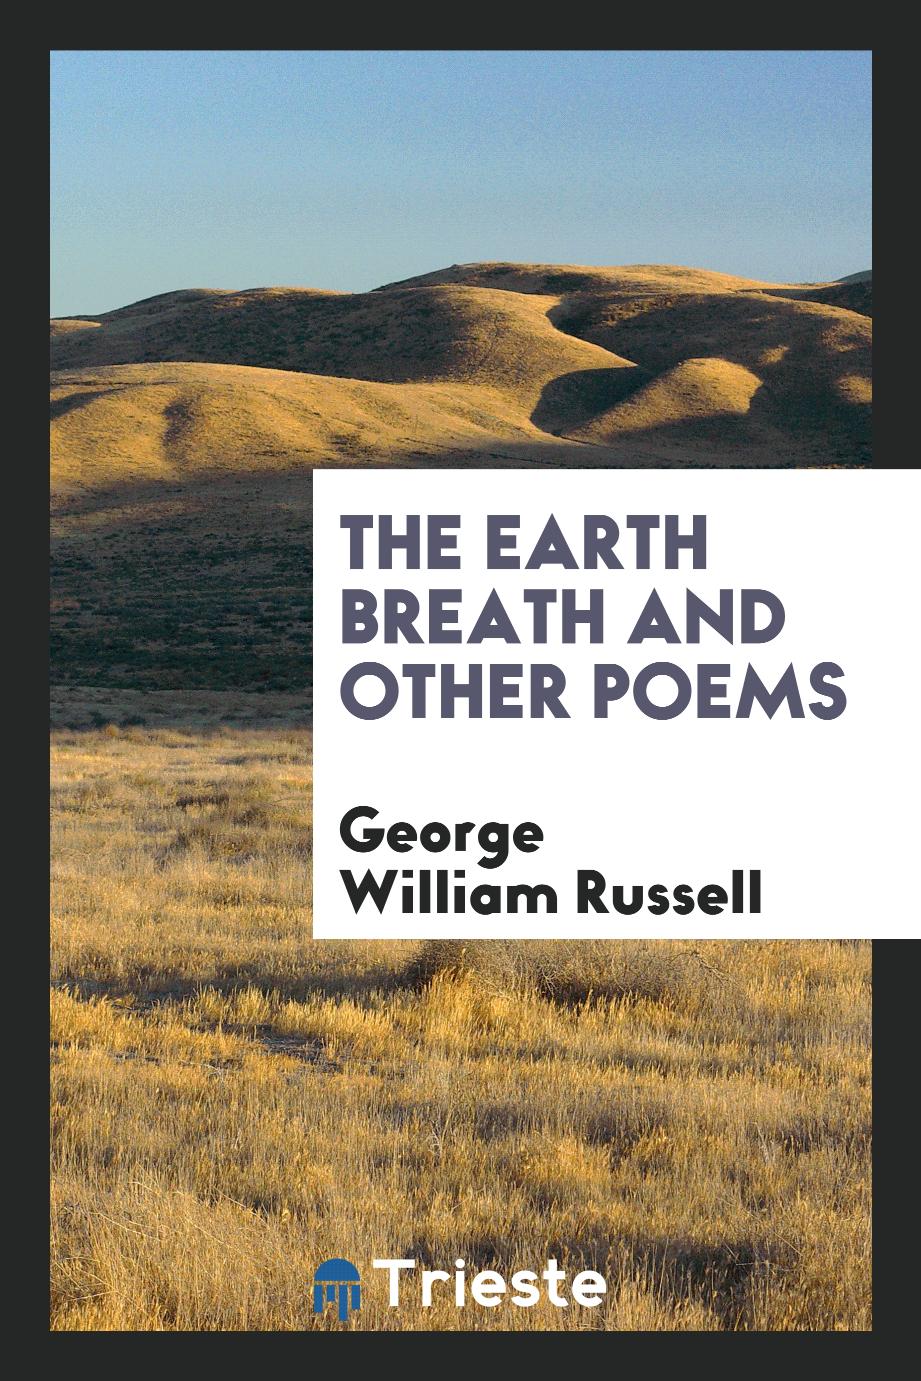 The earth breath and other poems